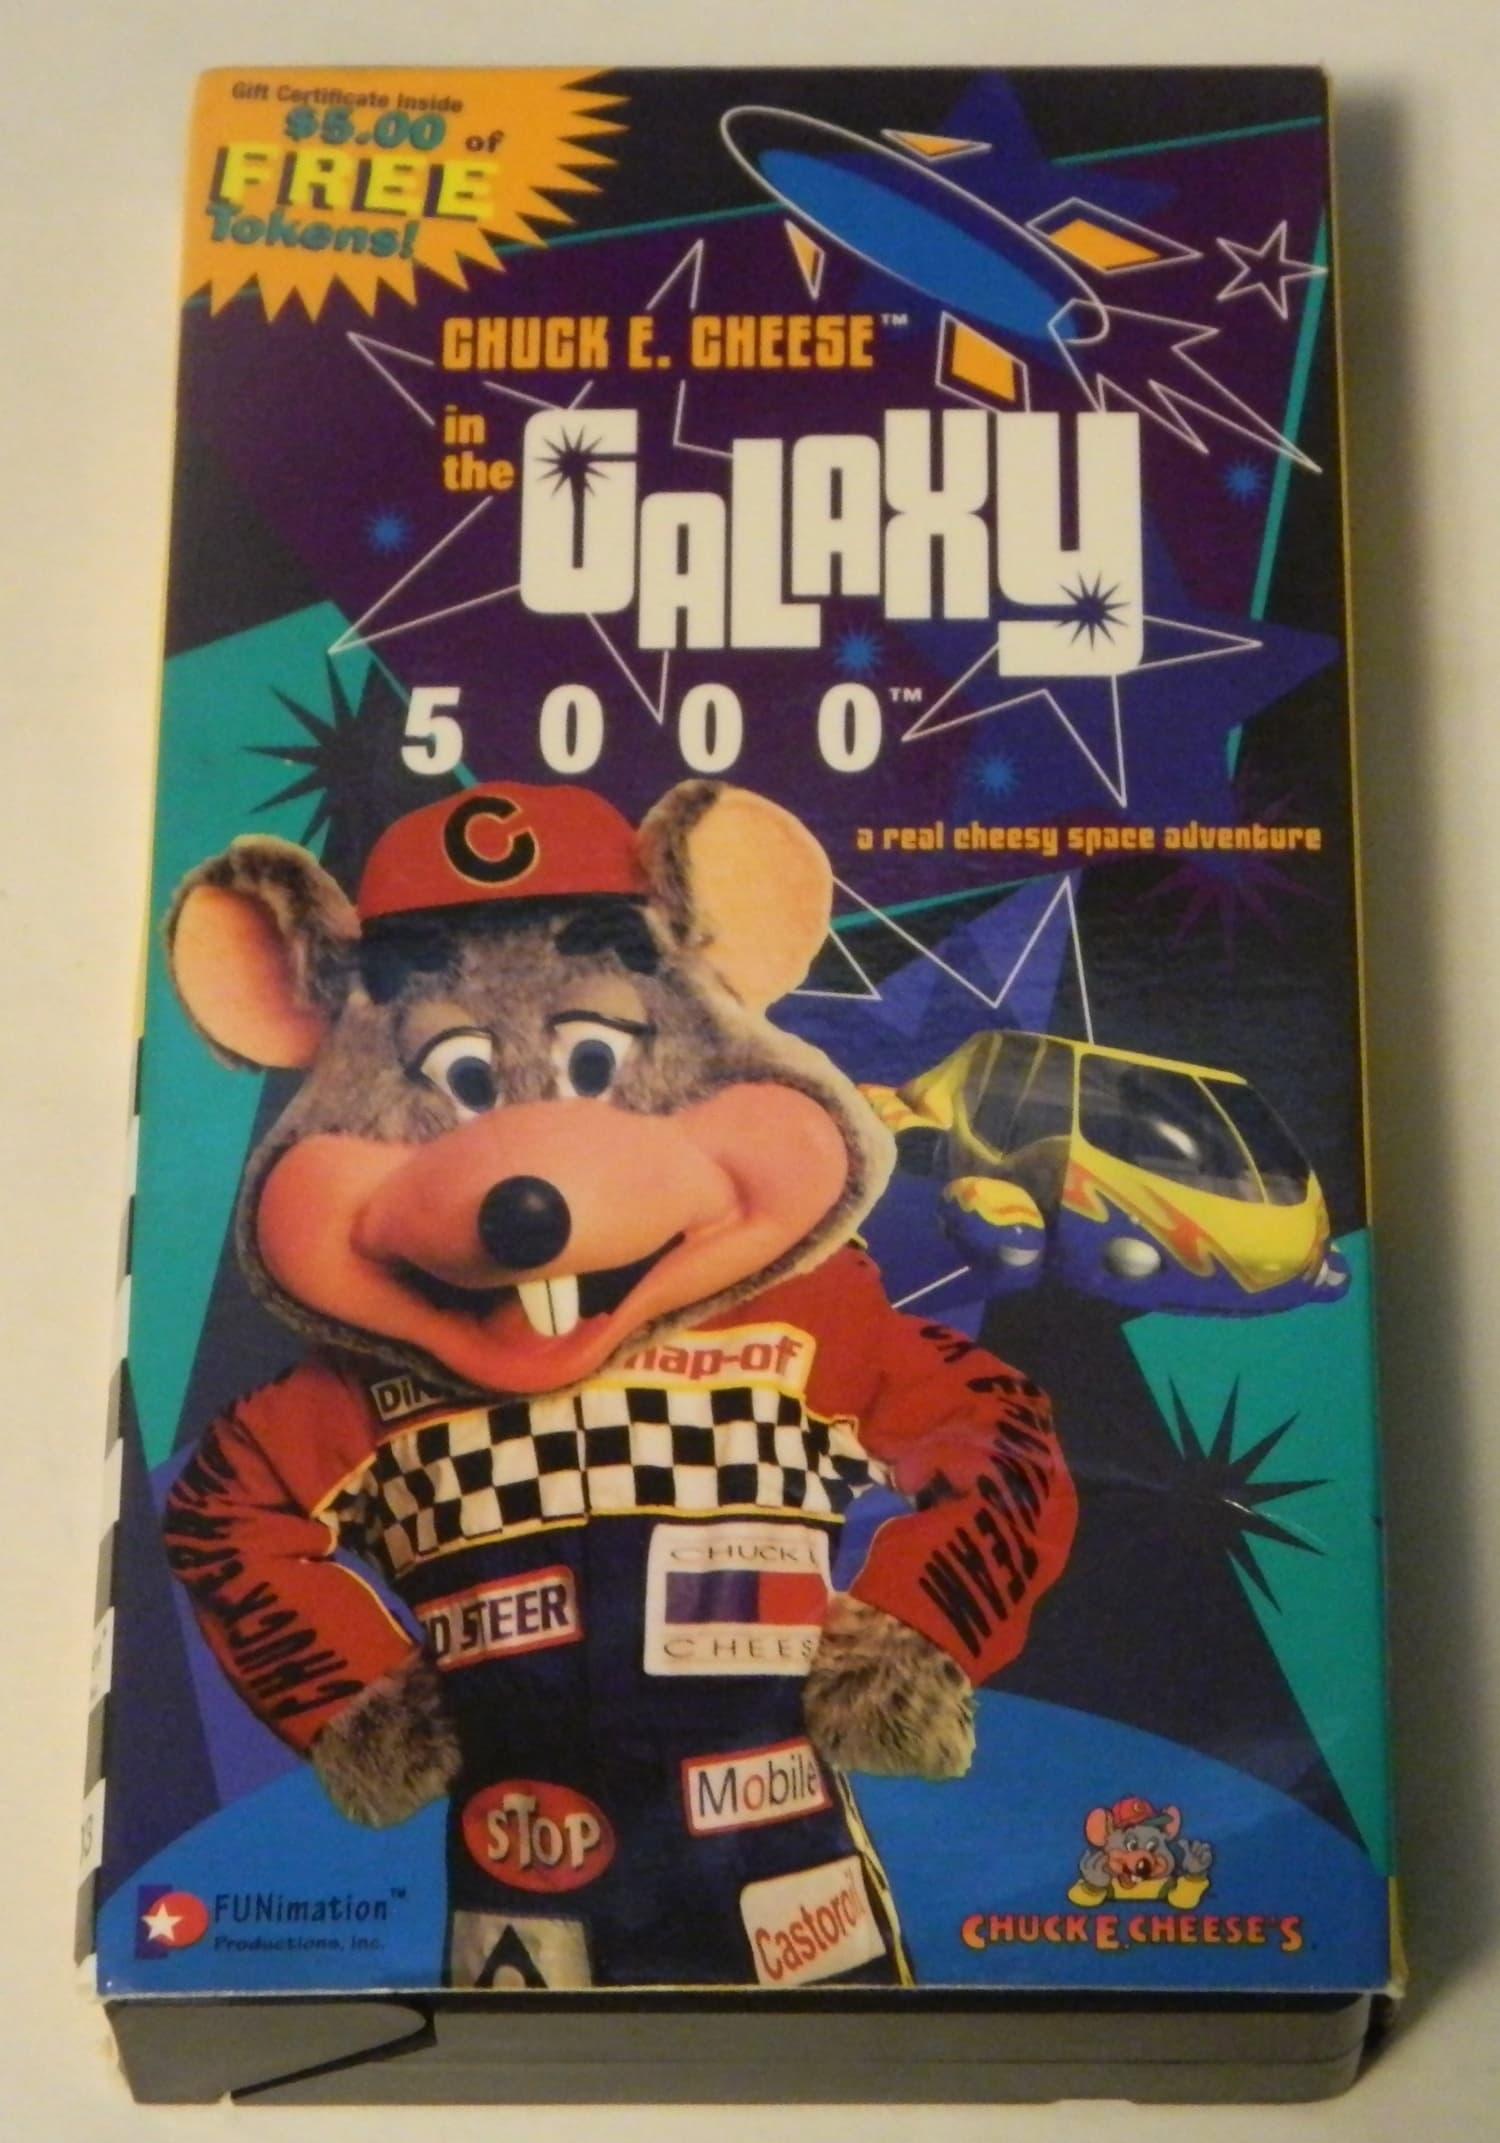 Chuck E. Cheese in the Galaxy 5000 poster